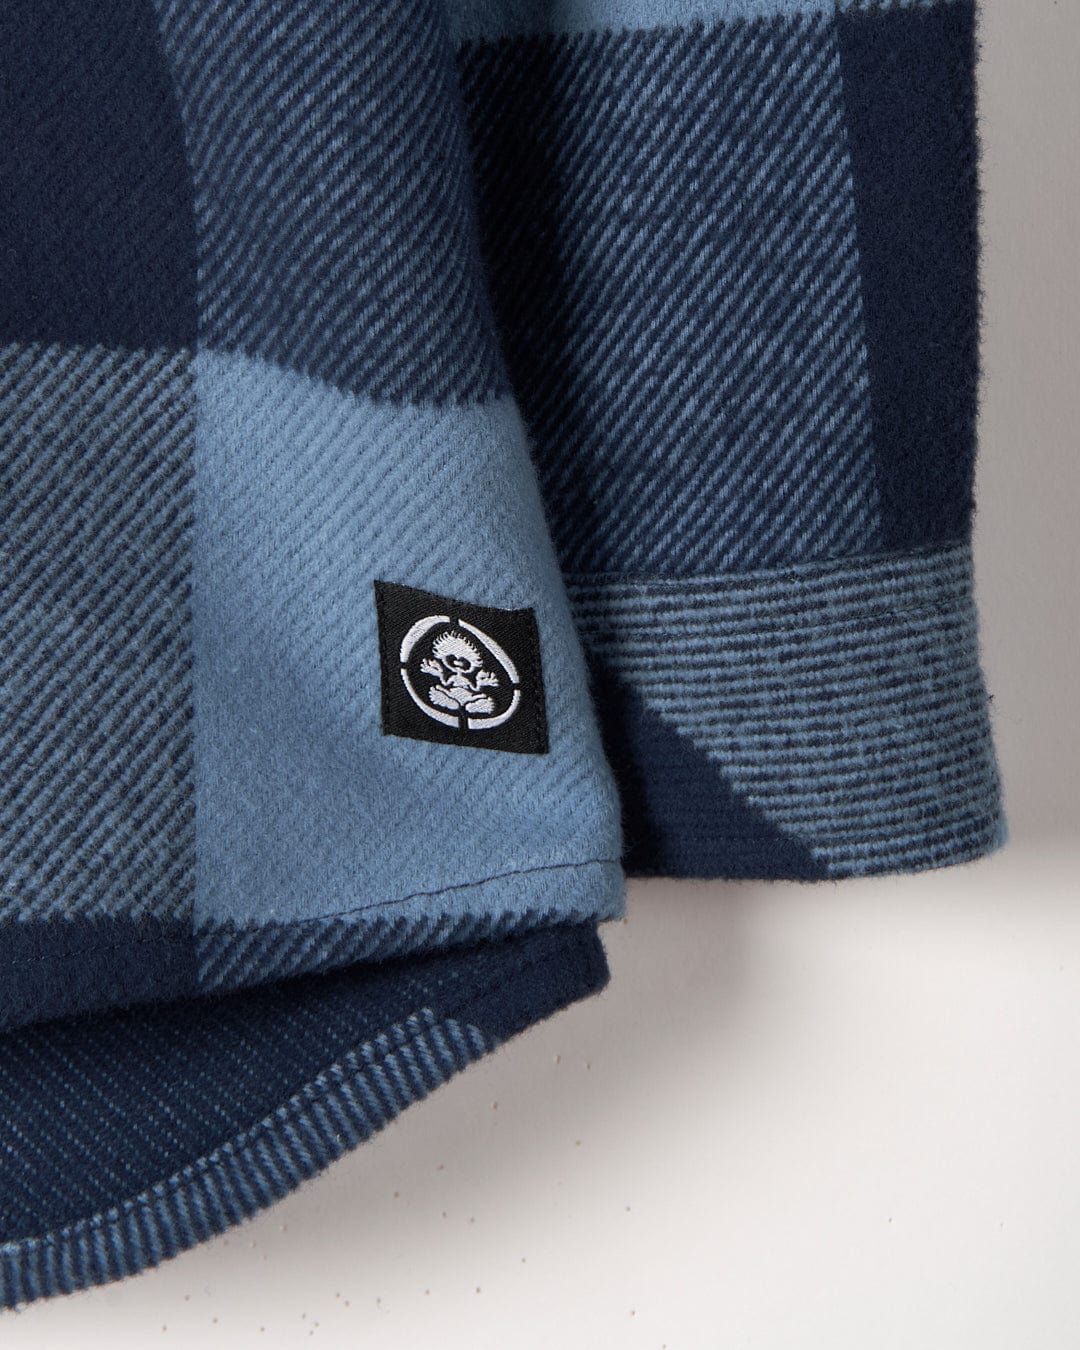 Close-up of a Saltrock Hawkins - Hooded Long Sleeve Check Shirt - Blue with a branded patch and pockets.